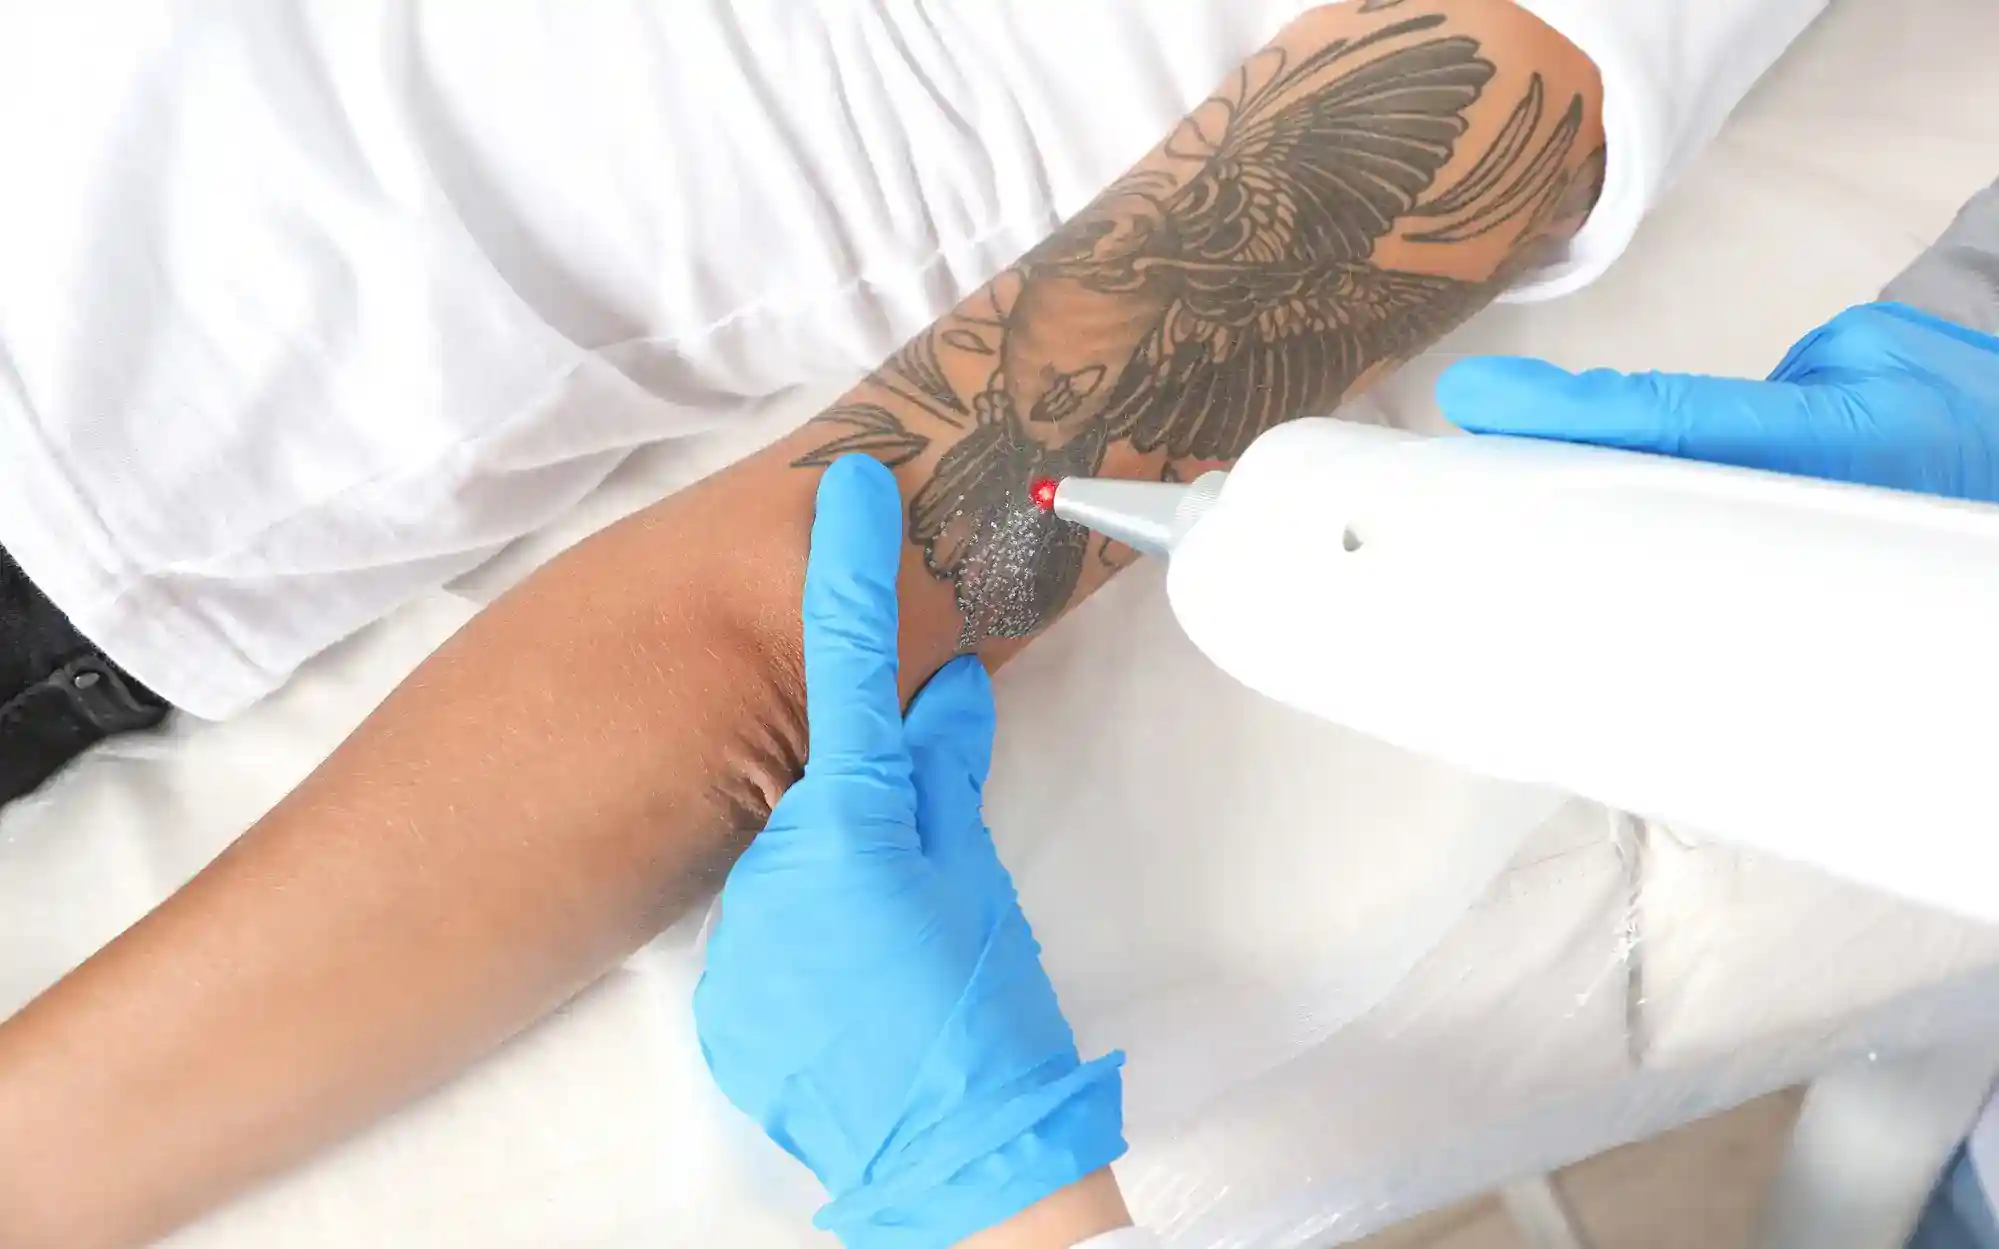 Before and After Tattoo Removal - Get the Best Results the All-Natural Way  | Tattoo Vanish | Laser tattoo removal, Tattoo removal, Picture tattoos